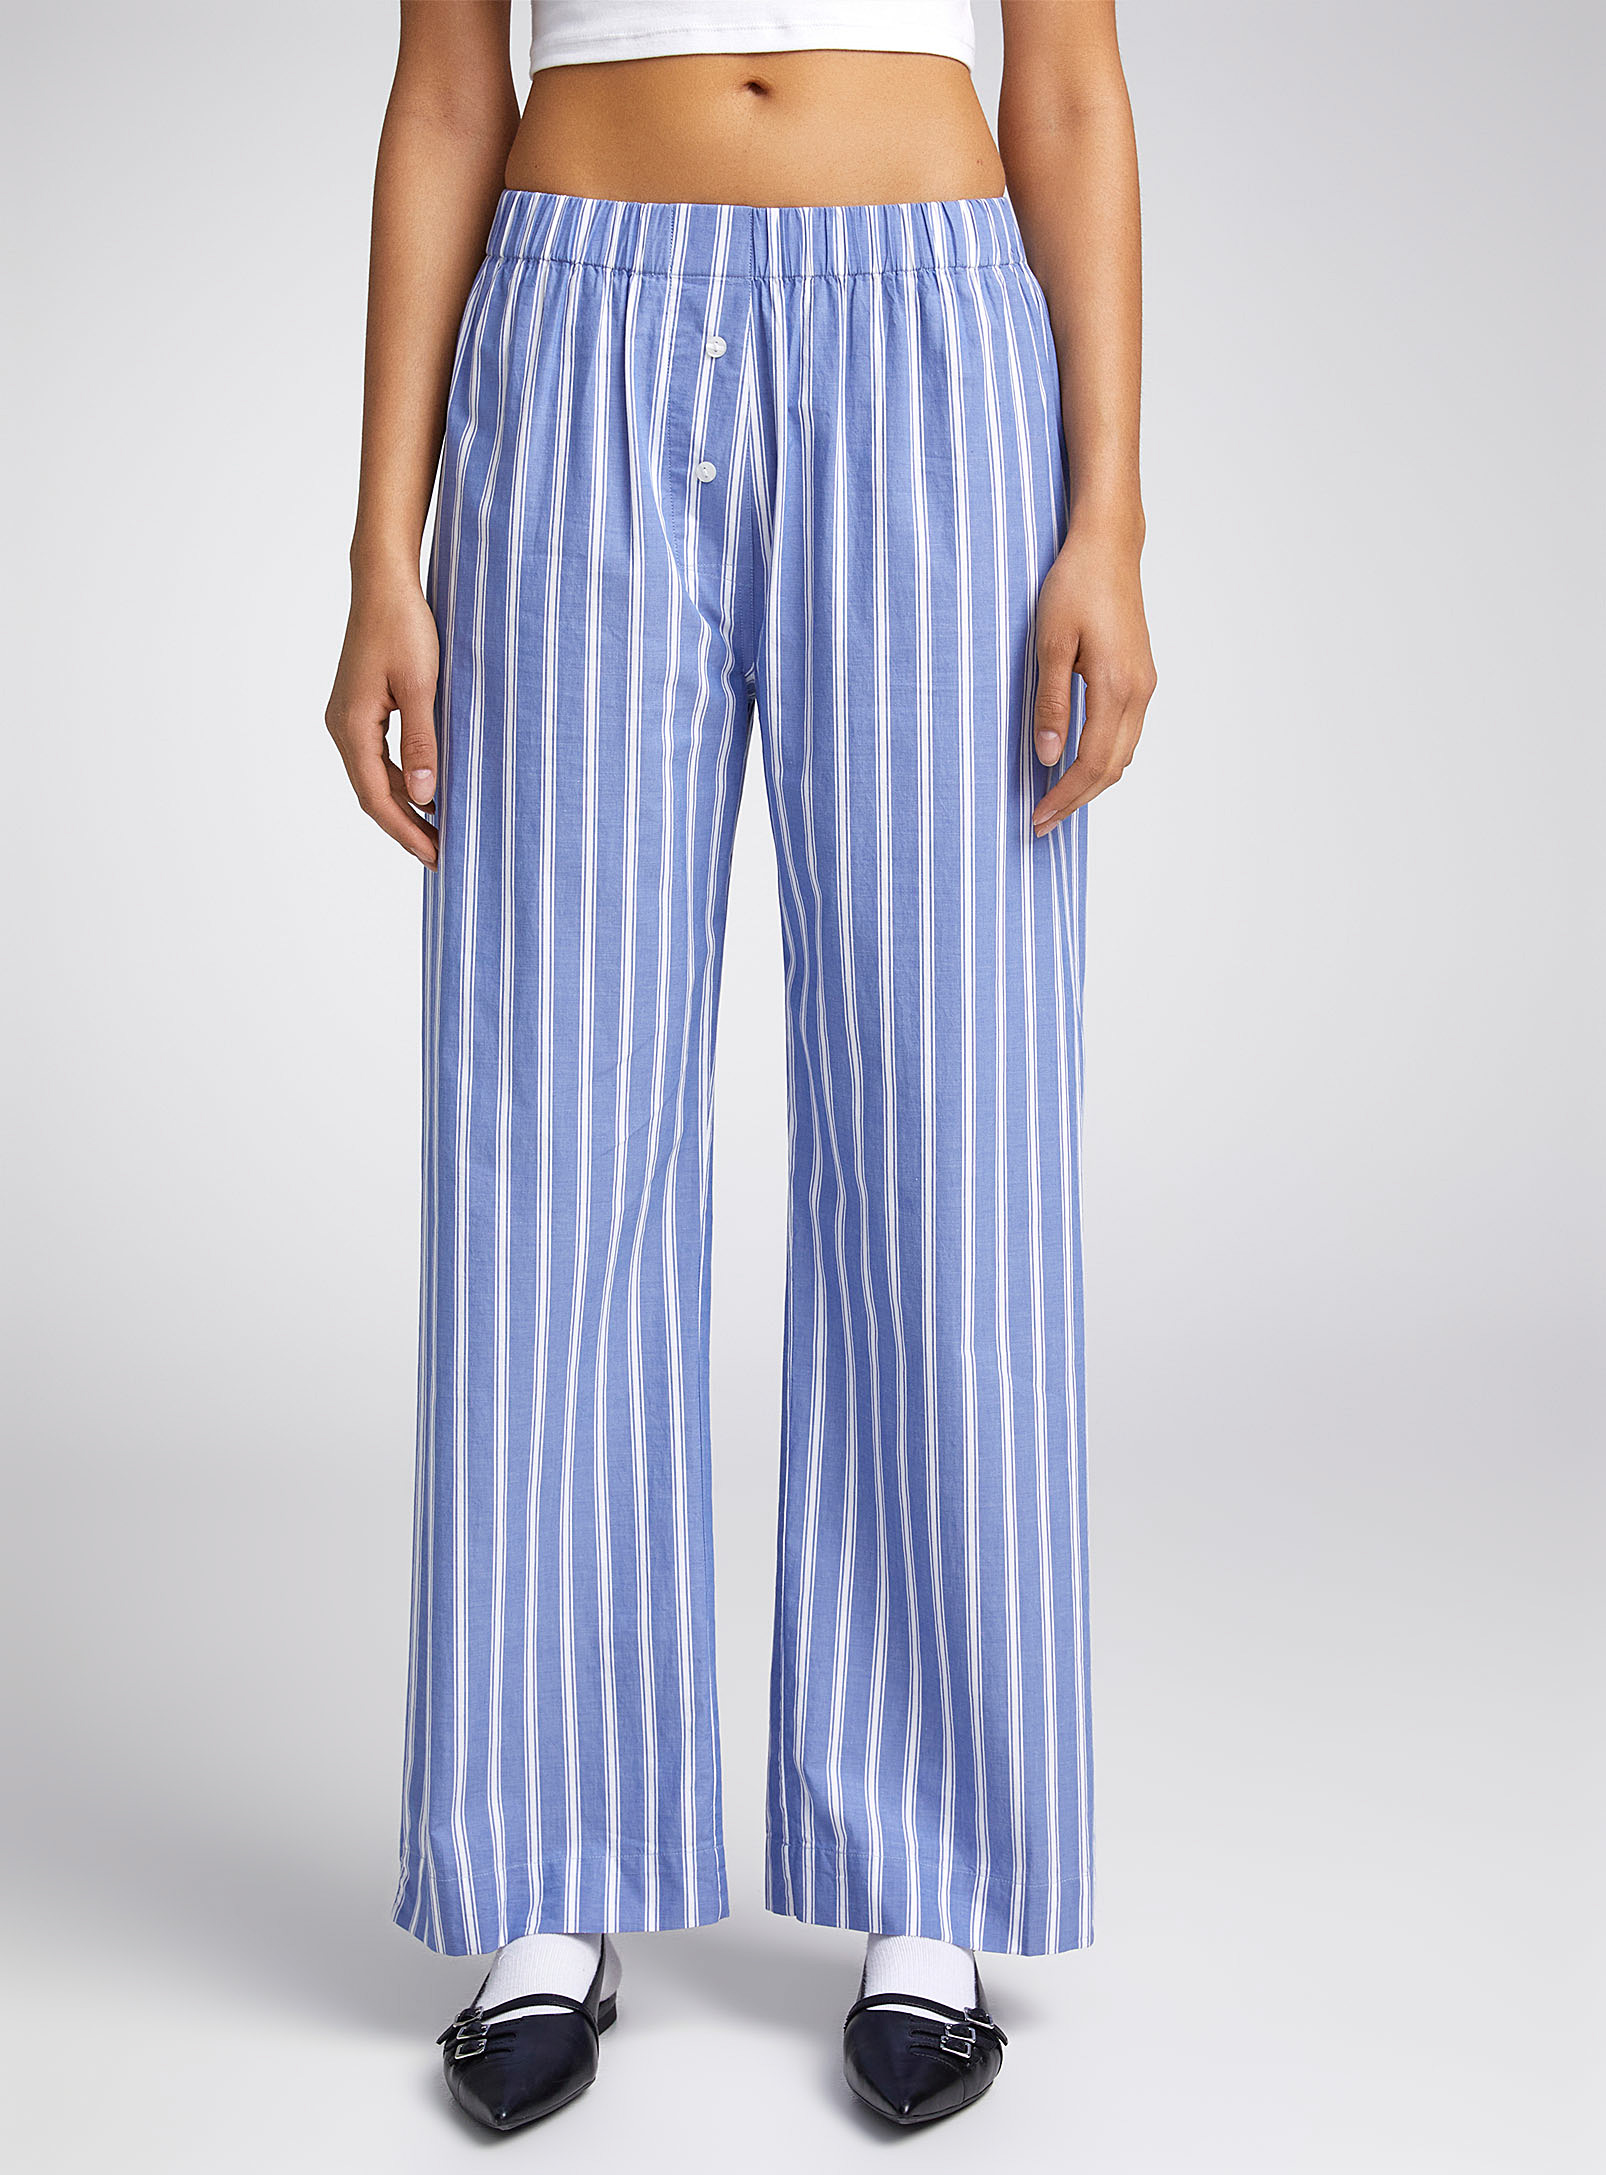 Twik Two-button Striped Straight-leg Pant In Patterned Blue